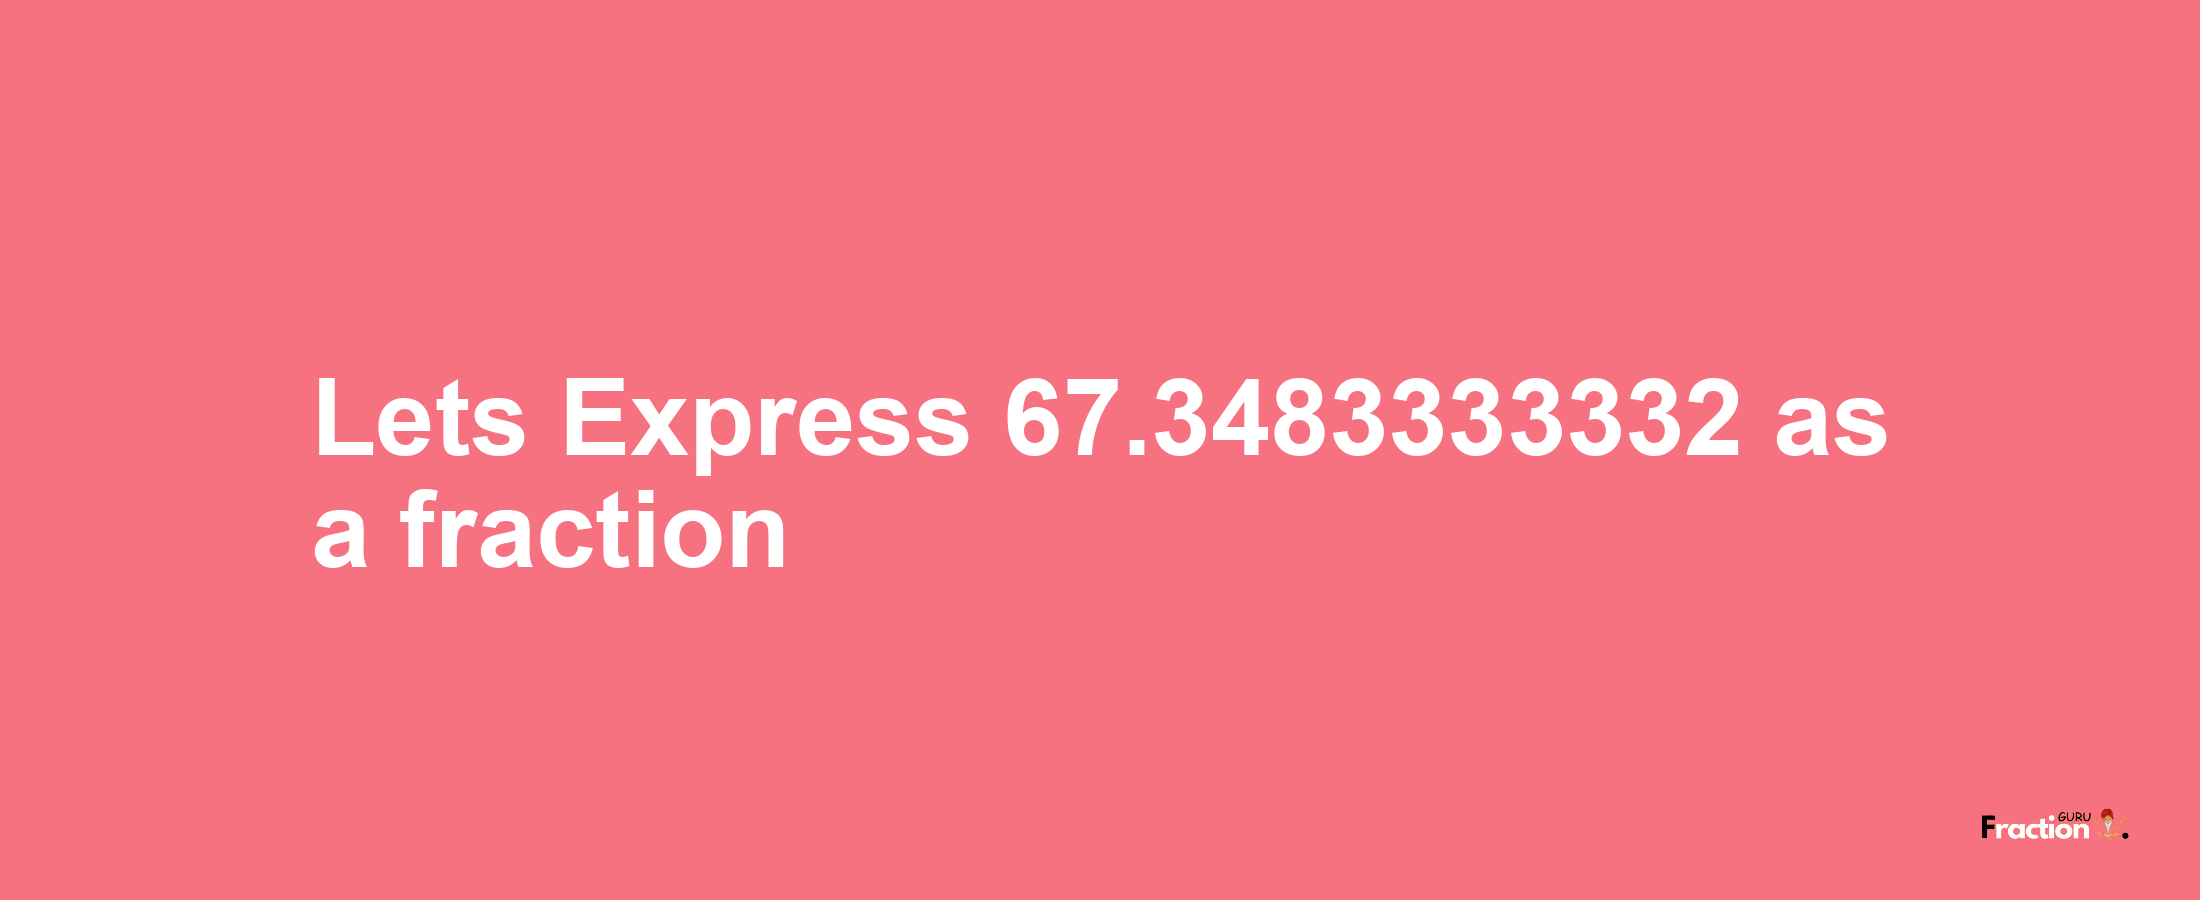 Lets Express 67.3483333332 as afraction